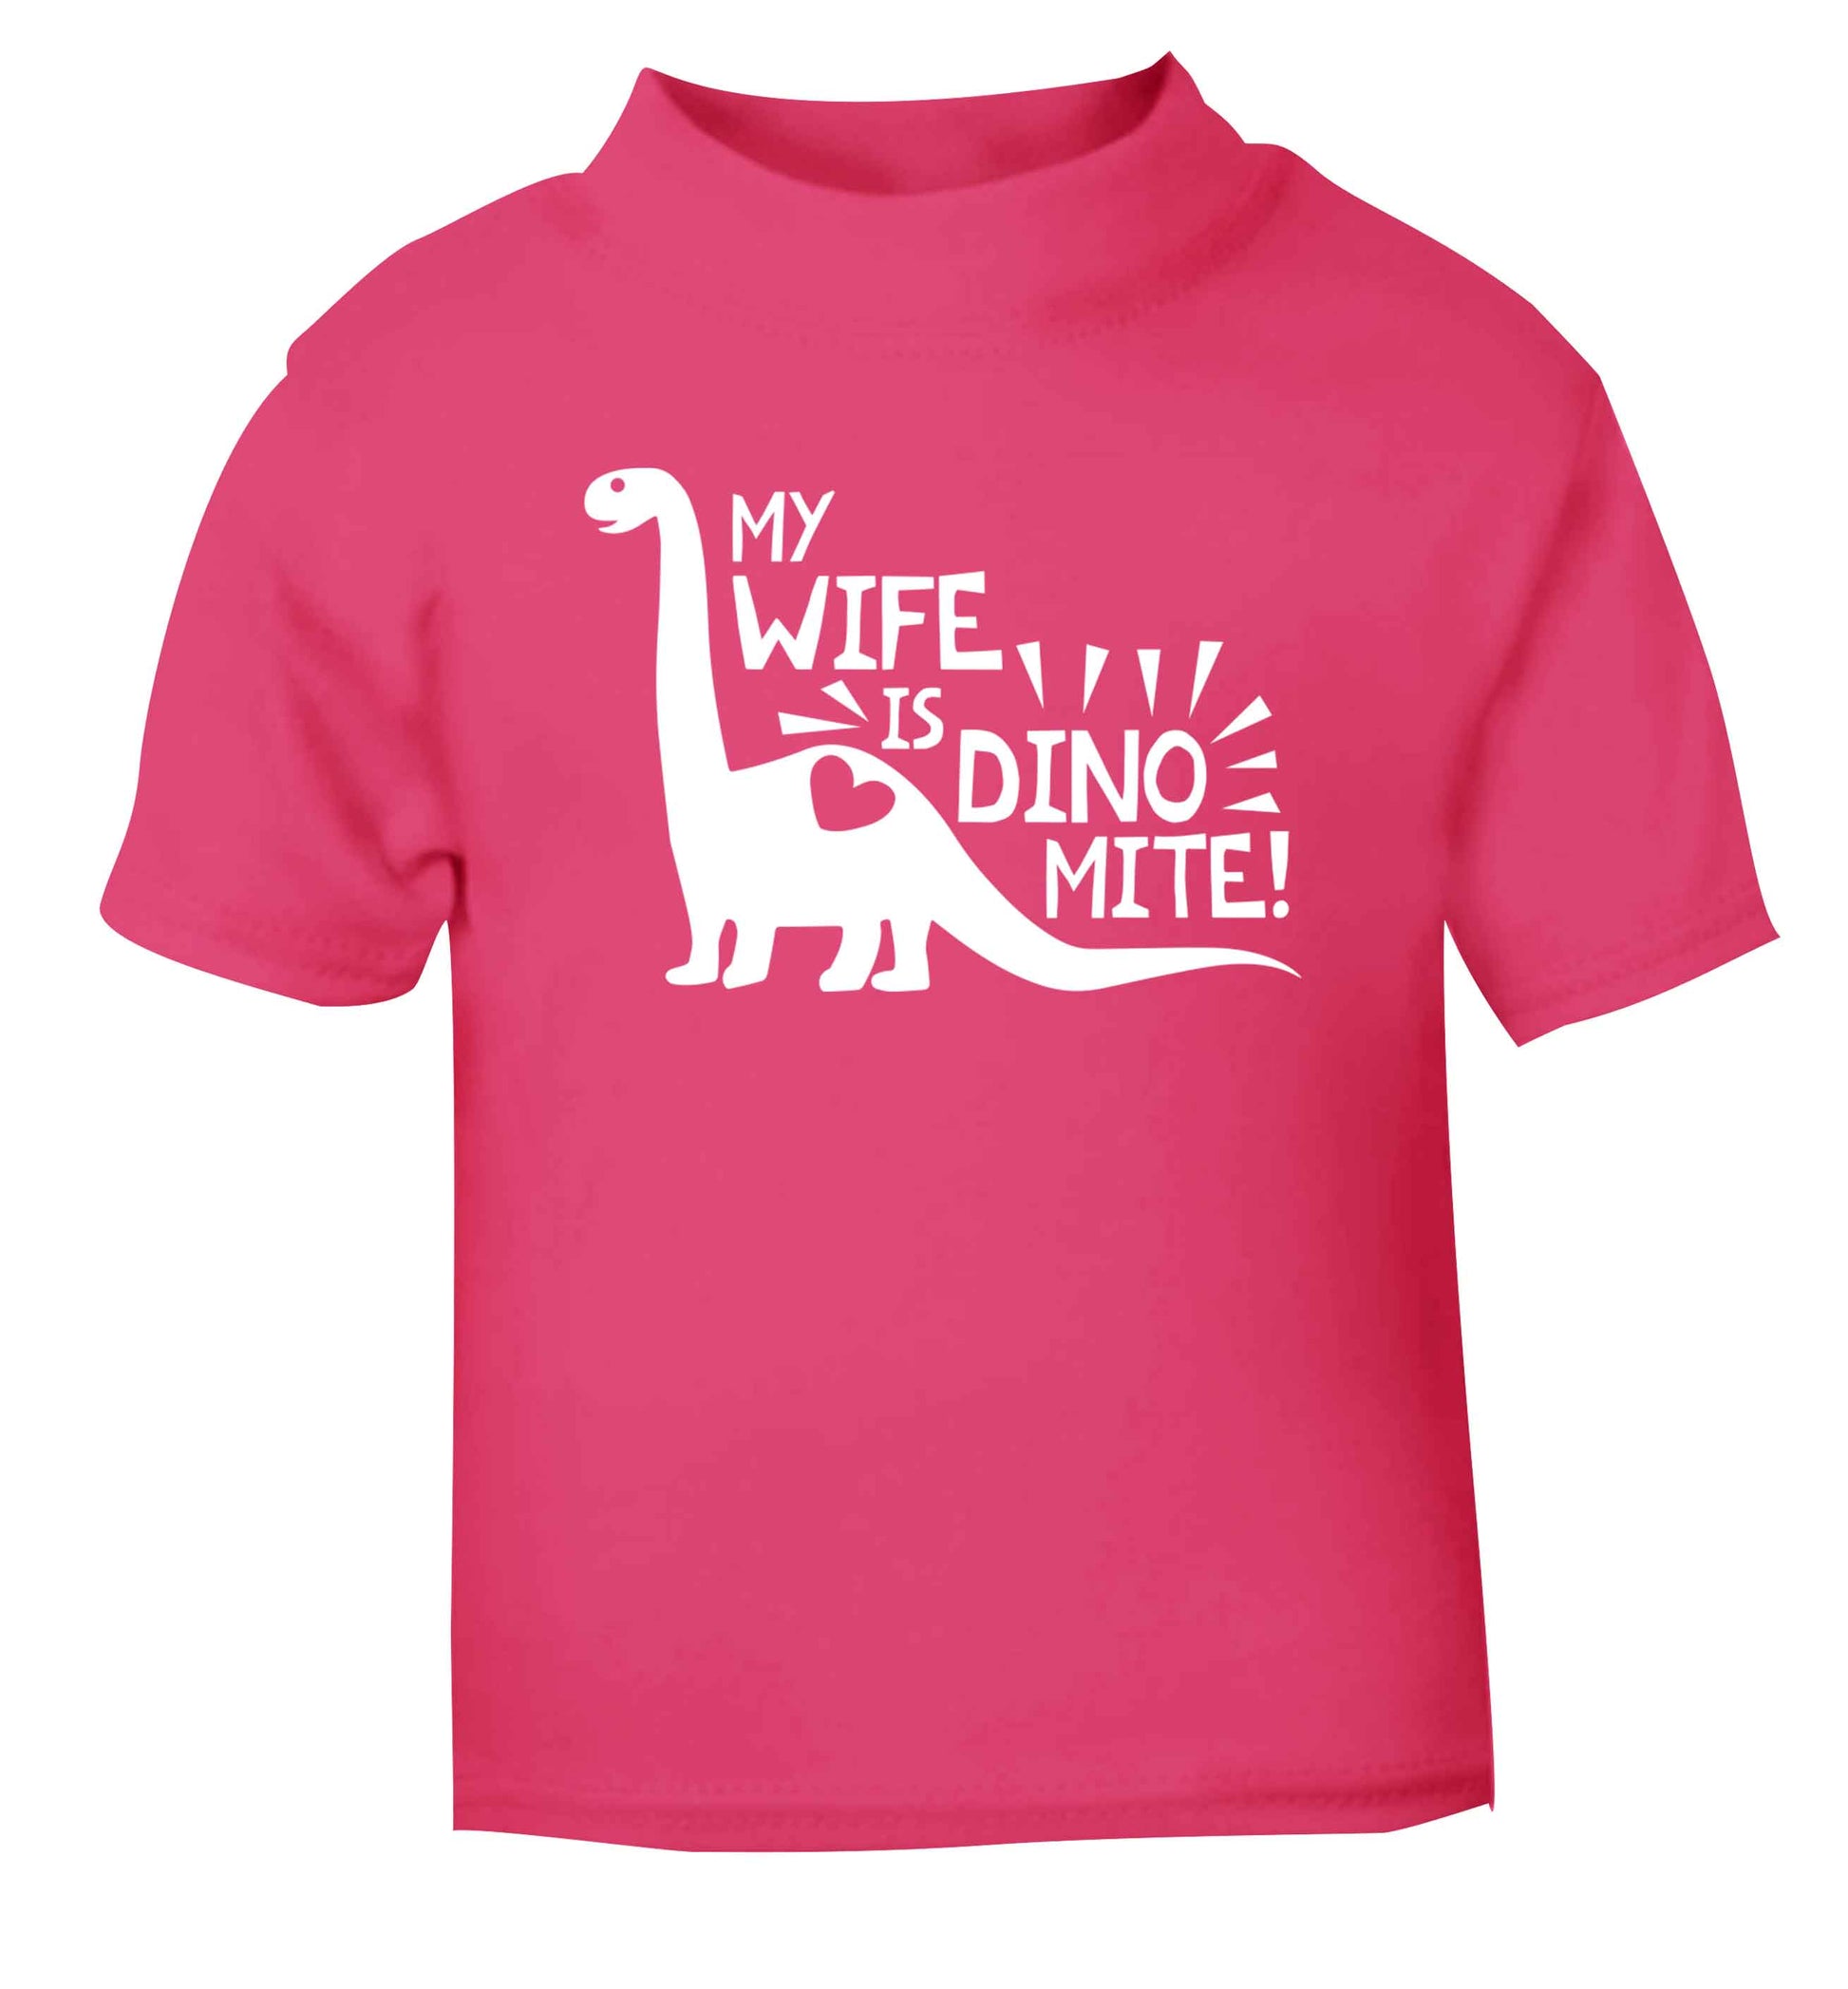 My wife is dinomite! pink Baby Toddler Tshirt 2 Years